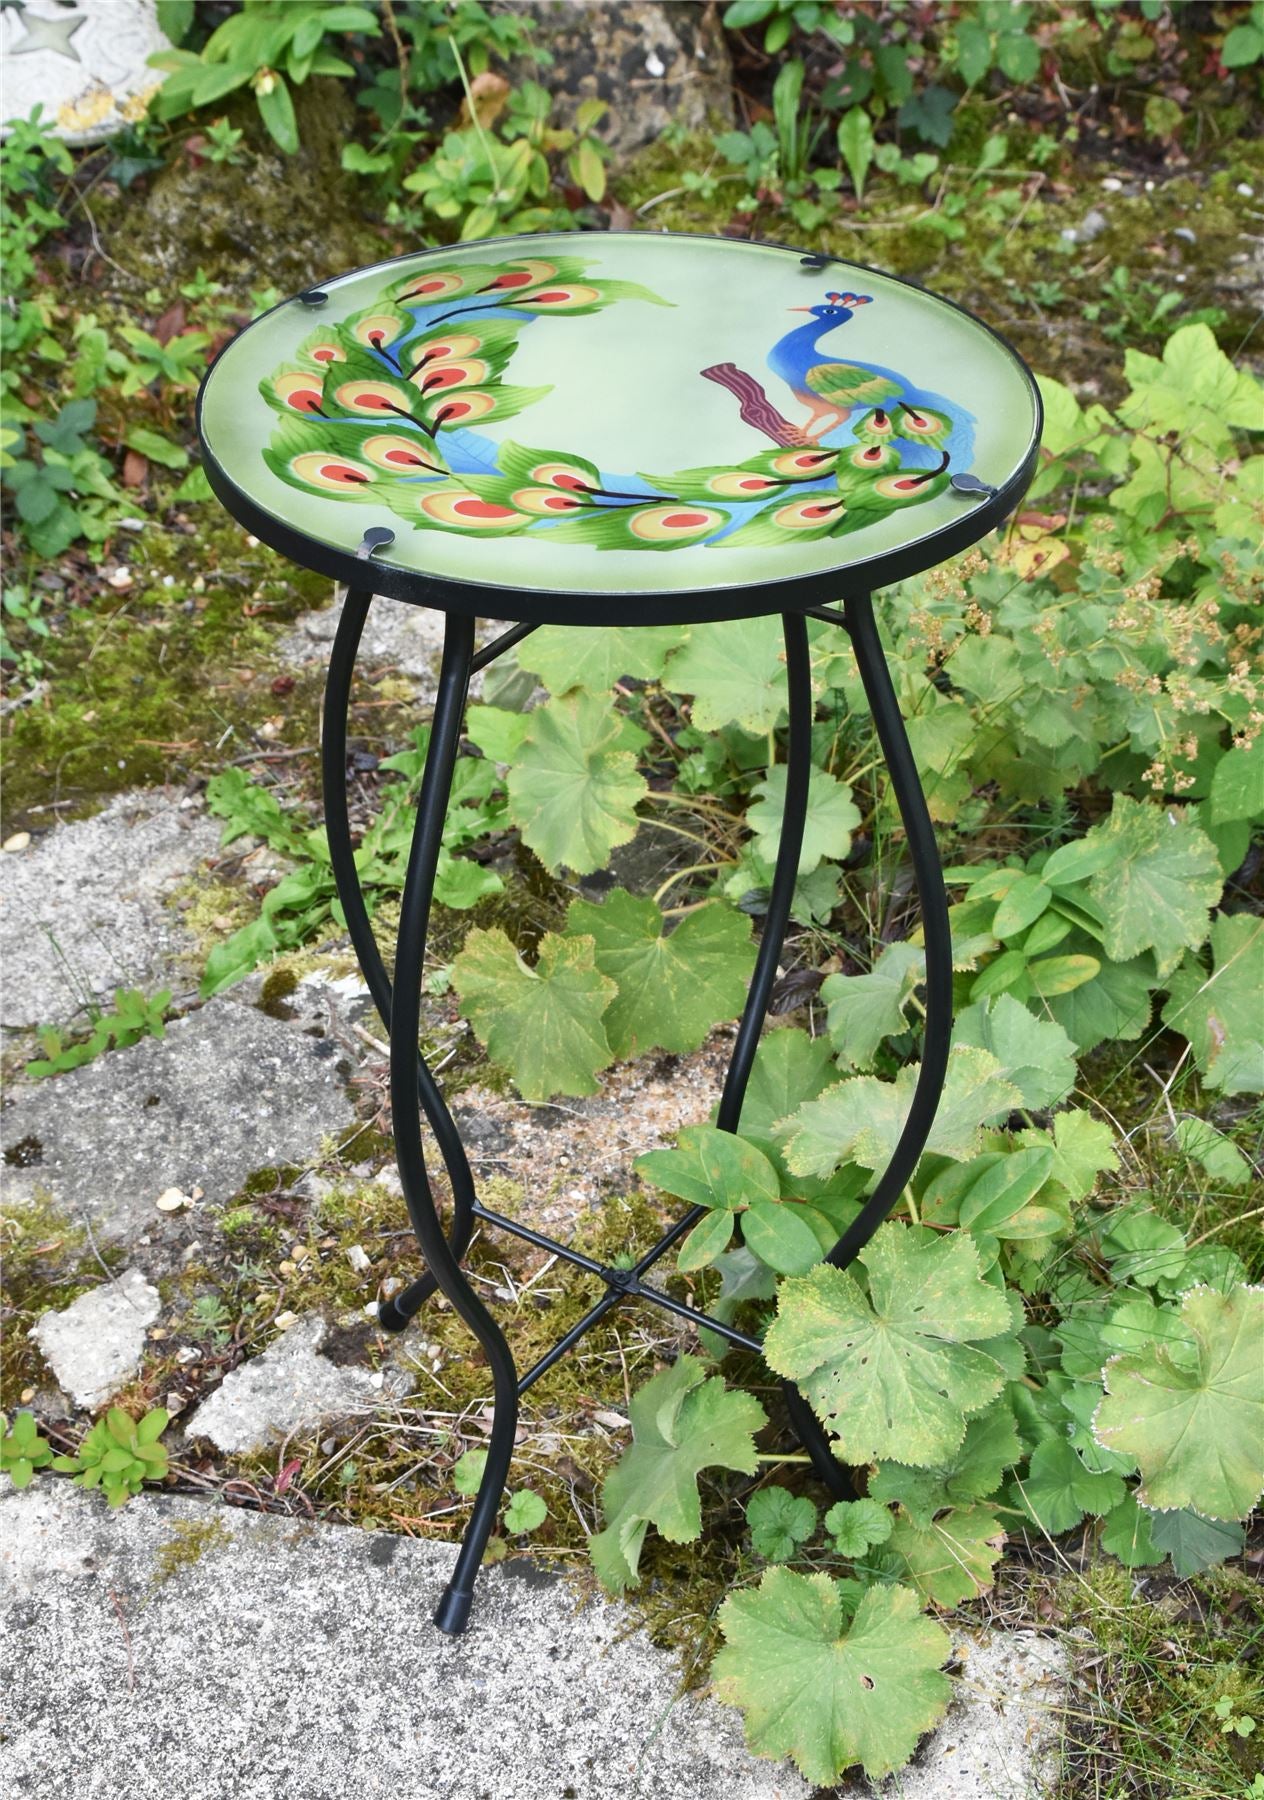 Round Side Mosaic Table With Peacock Design by GEEZY - UKBuyZone